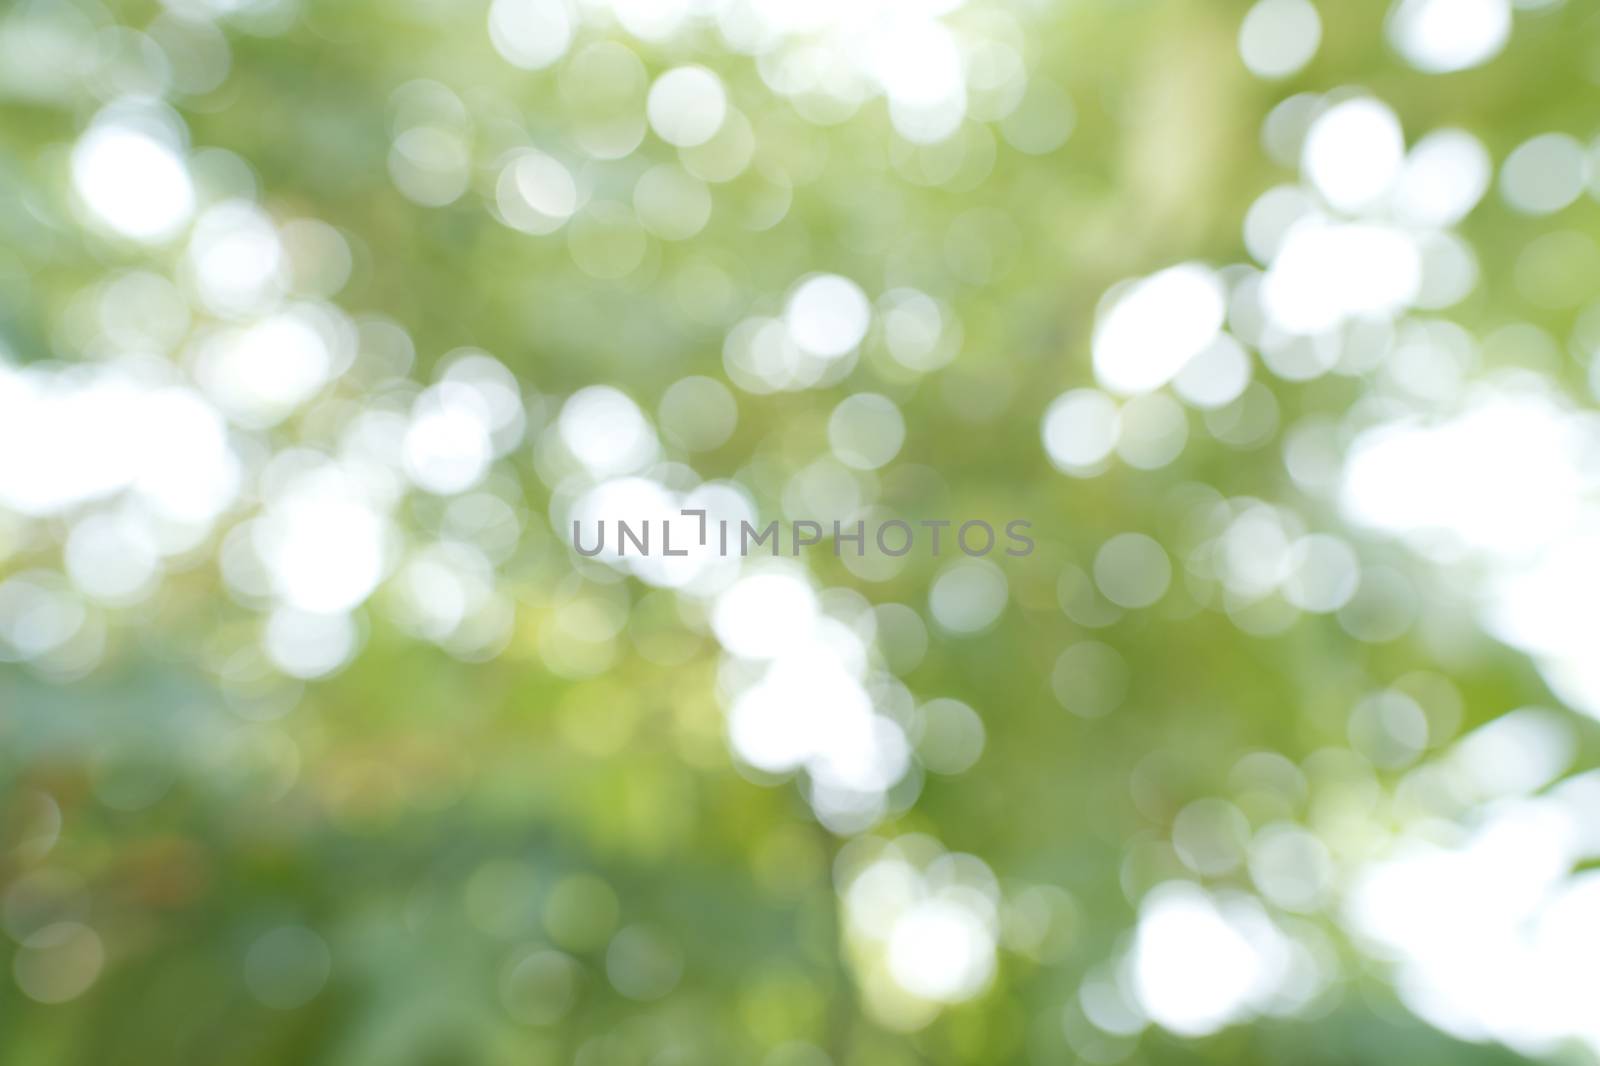 Abstract, the green bokeh background from a tree in a forest garden represents a fresh, bright